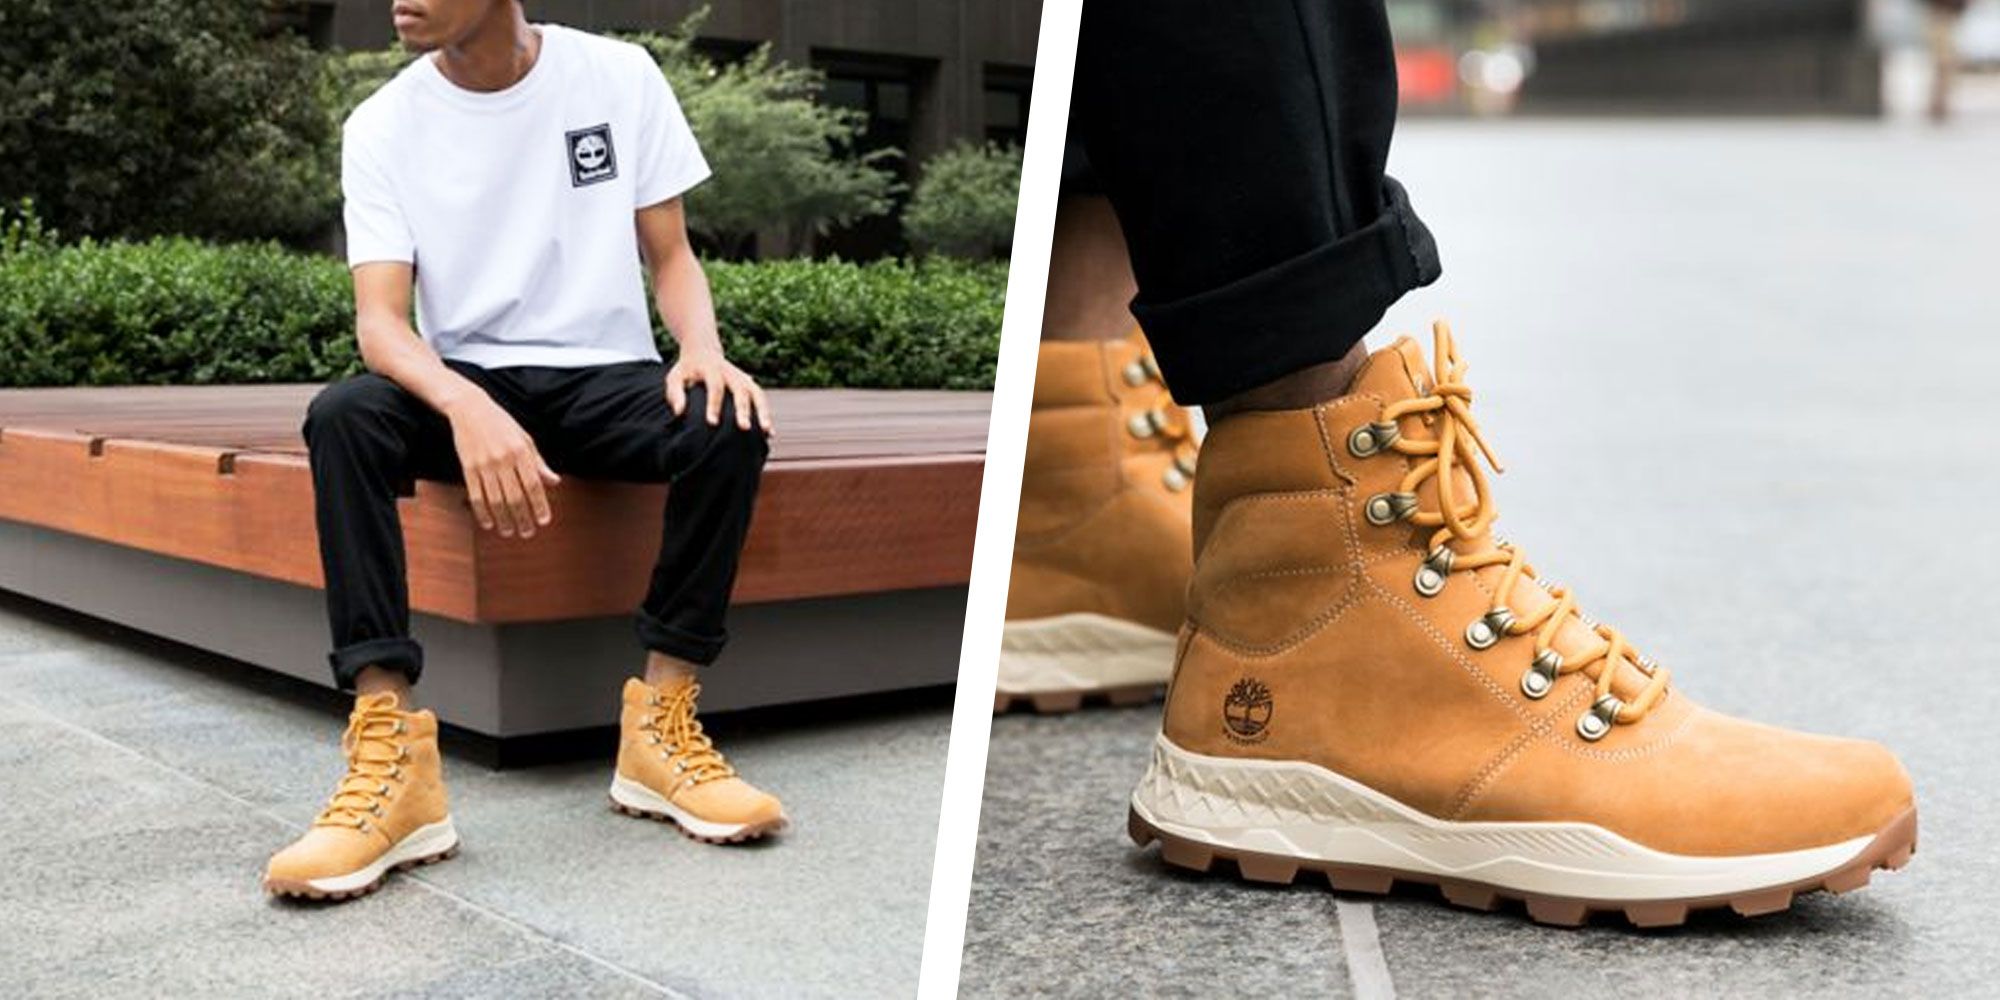 Men's Shoe Trends 2023: 11 Styles From Sneakers to Boots & More